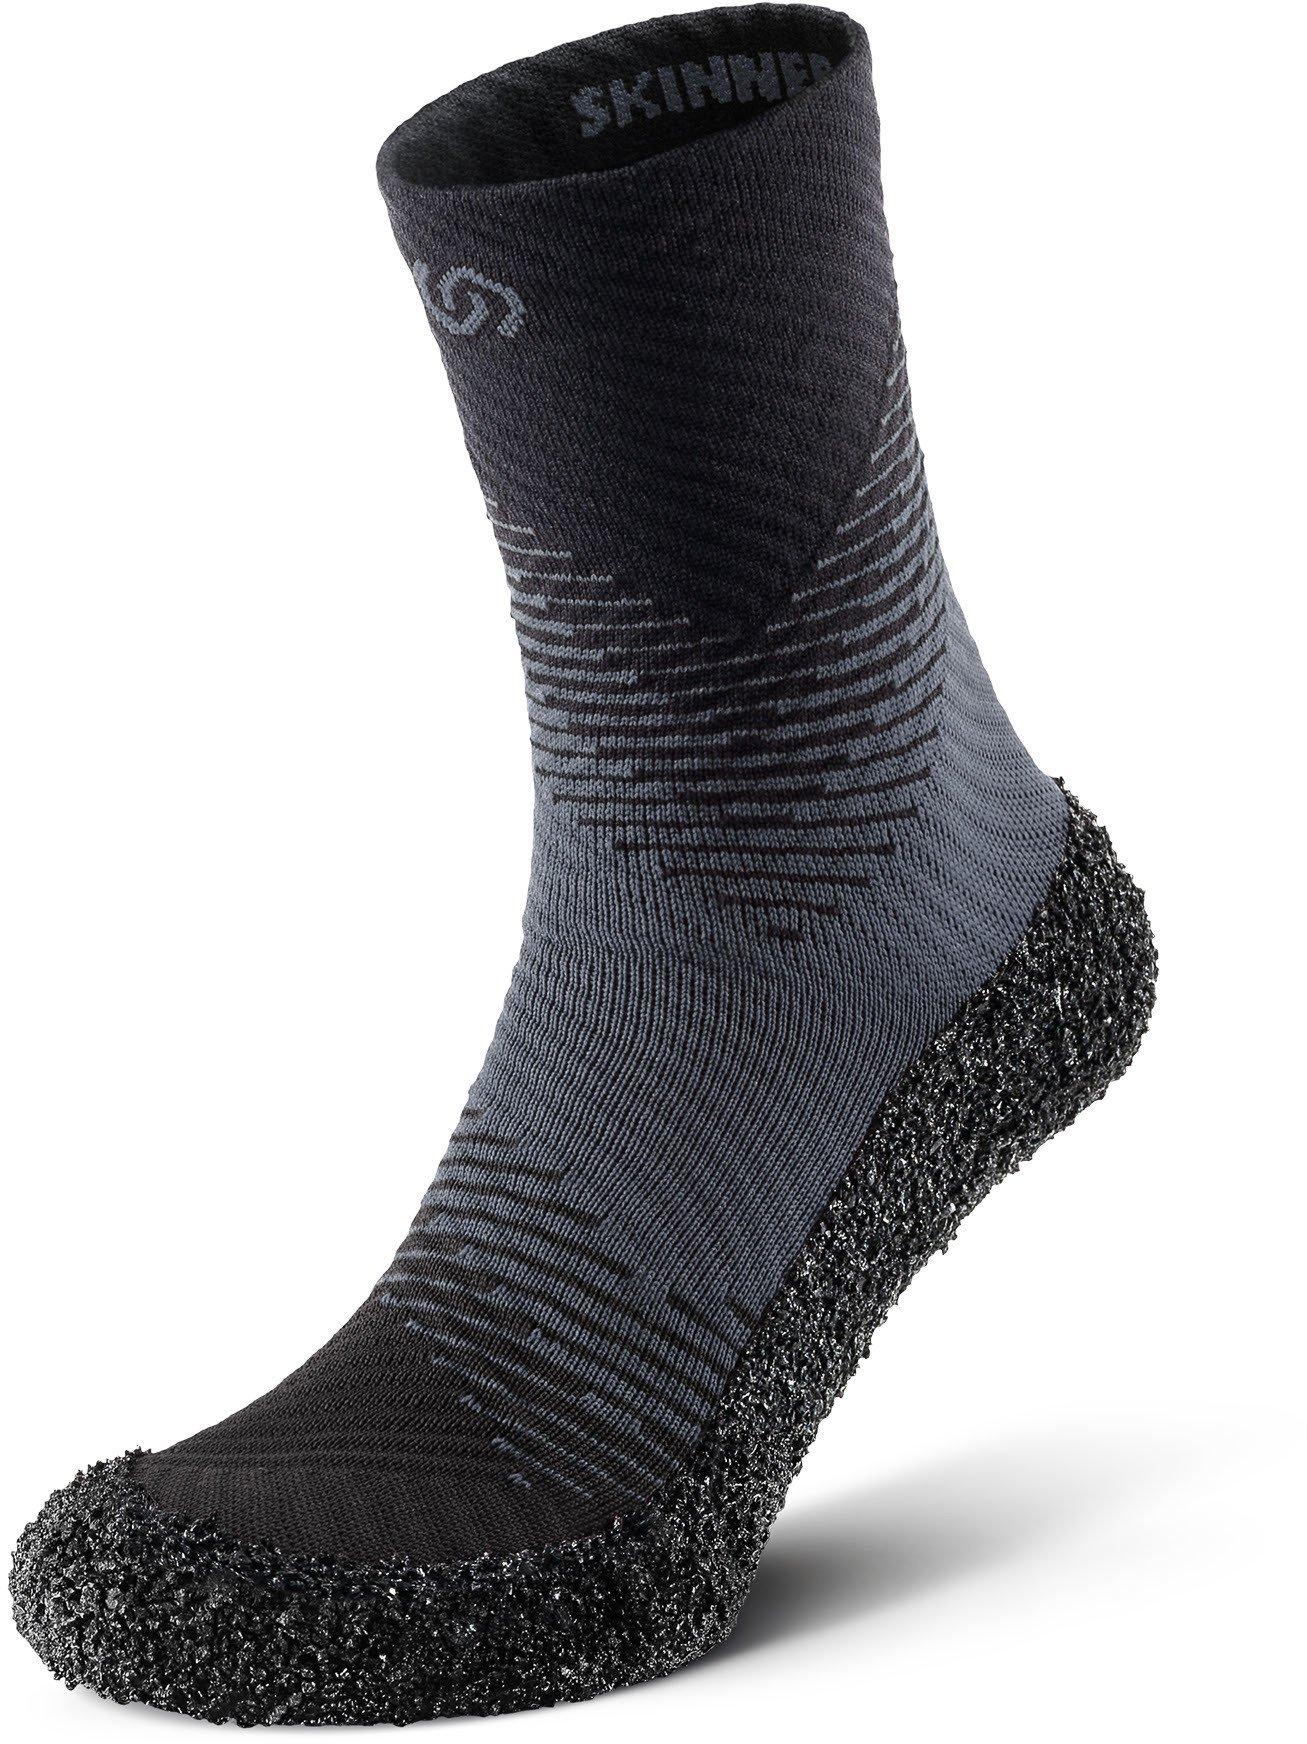 Skinners 2.0 Compression Anthracite 47-49